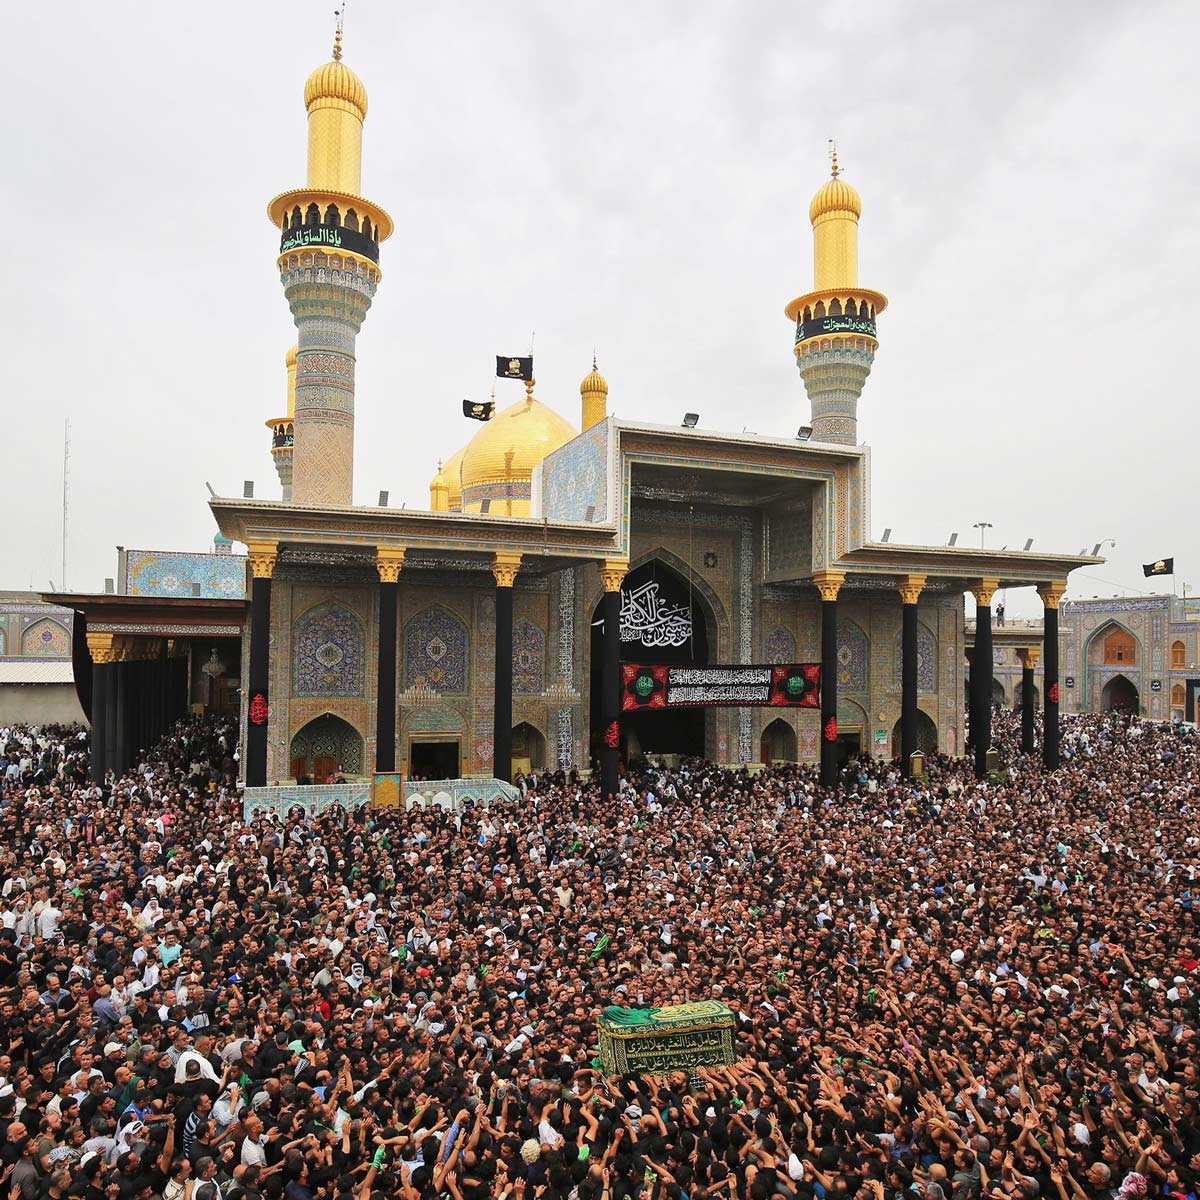 Shiite Muslim worshippers carry a symbolic casket as they gather at the Imam Moussa al-Kadhim's mosque in the Iraqi capital's northern district of Kadhimiya to mark the anniversary of the imam's death in the 8th Century.